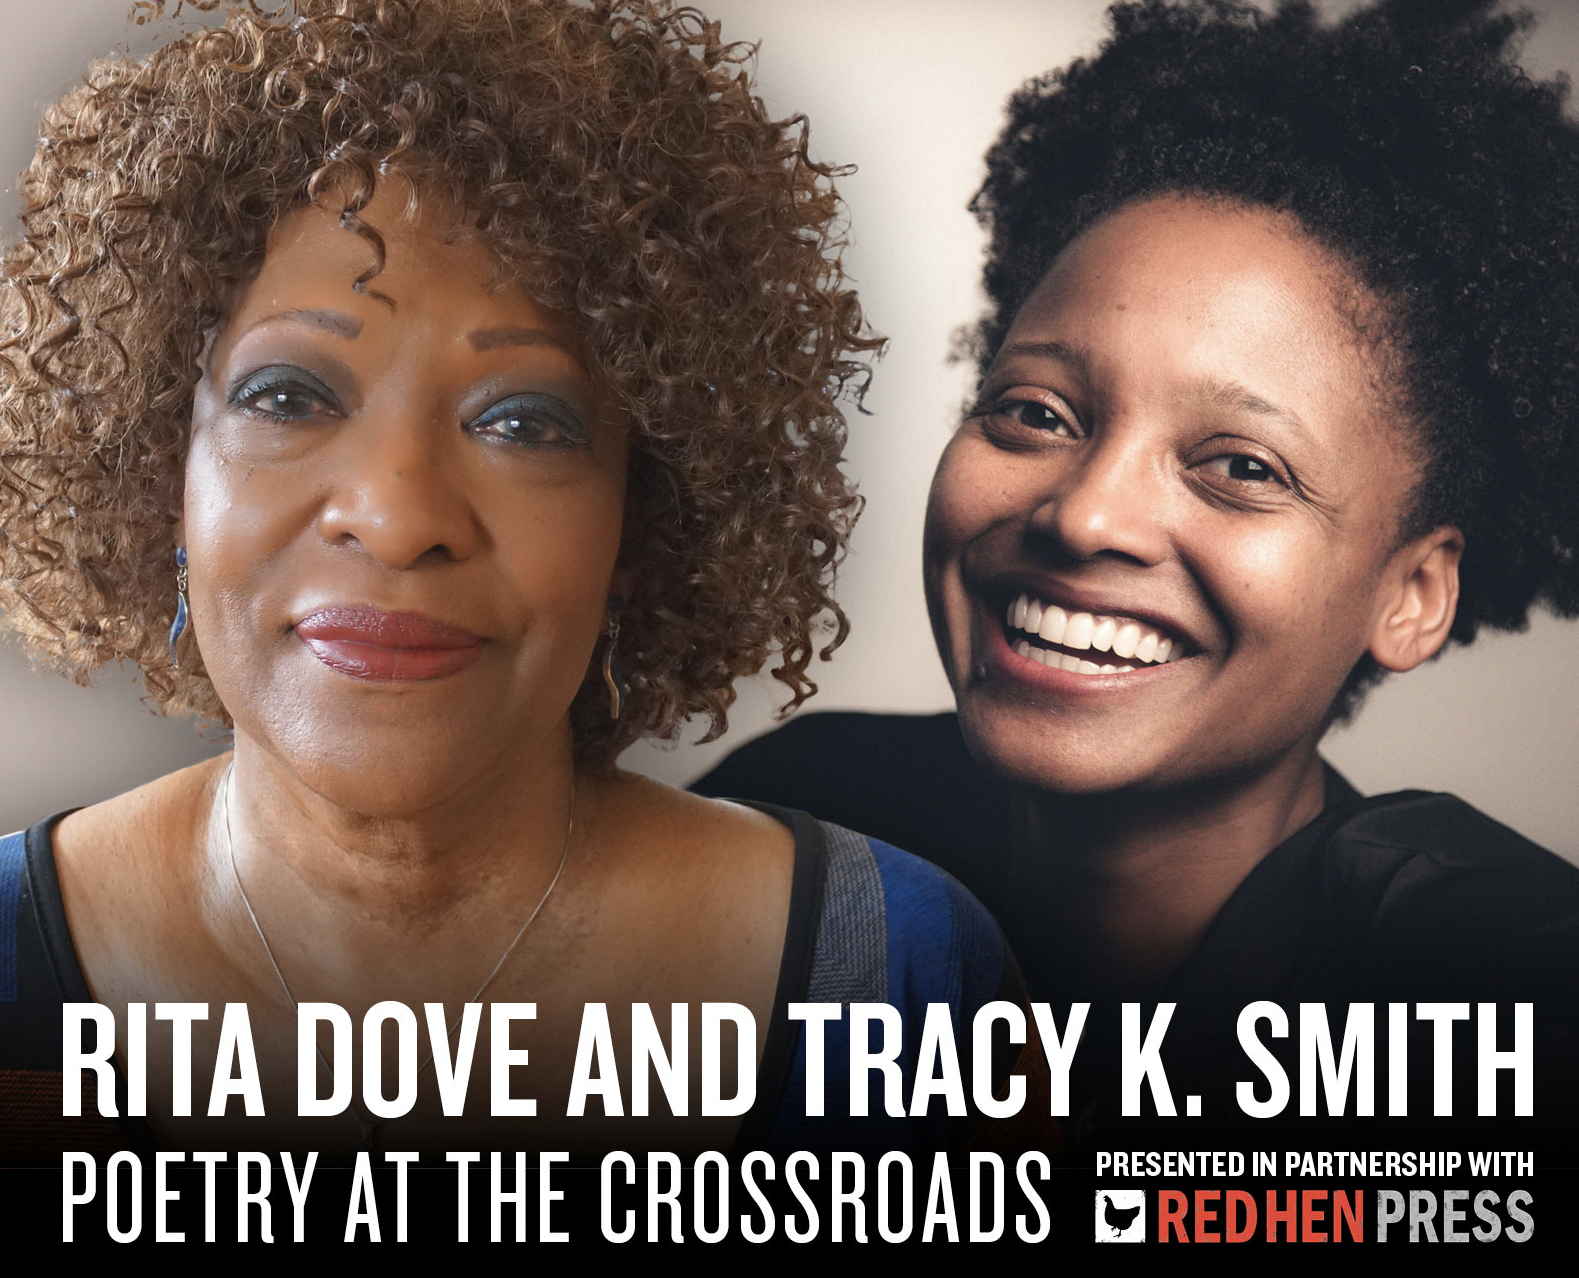 Rita Dove and Tracy K. Smith for Poetry at the Crossroads